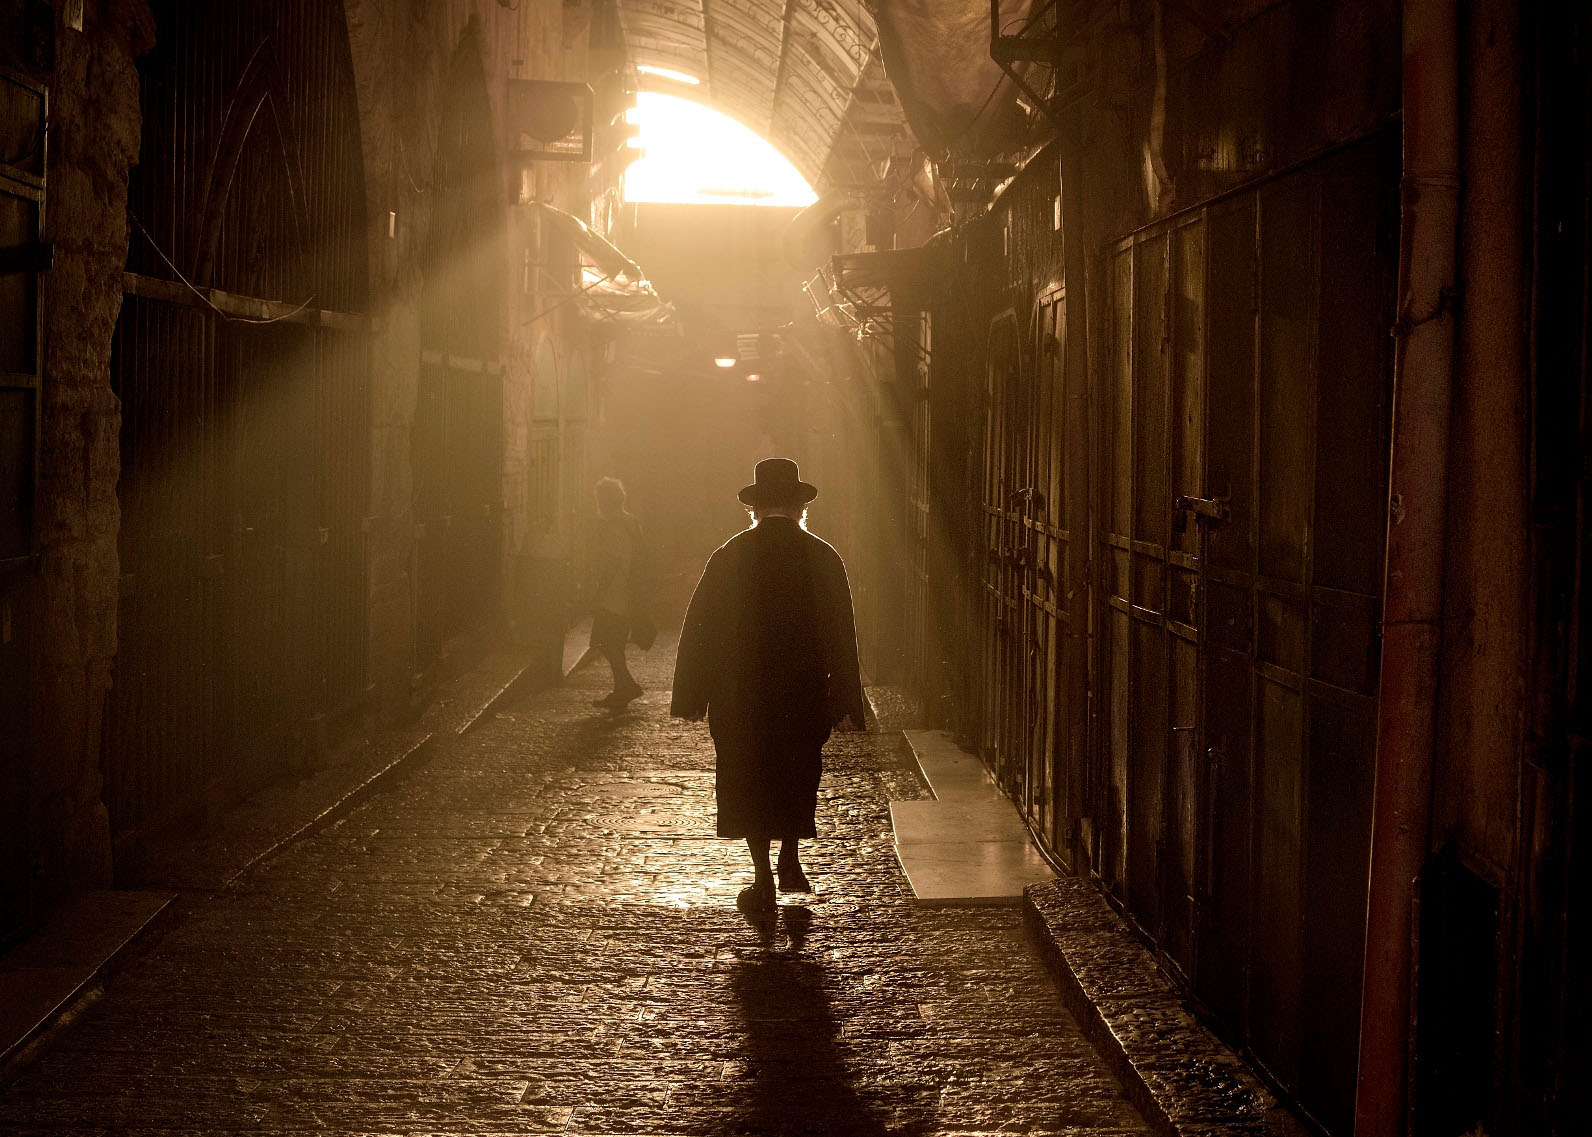 Dalia Rajuan’s photo of a pedestrian in the Old City got the second most votes in JerusaLENS.